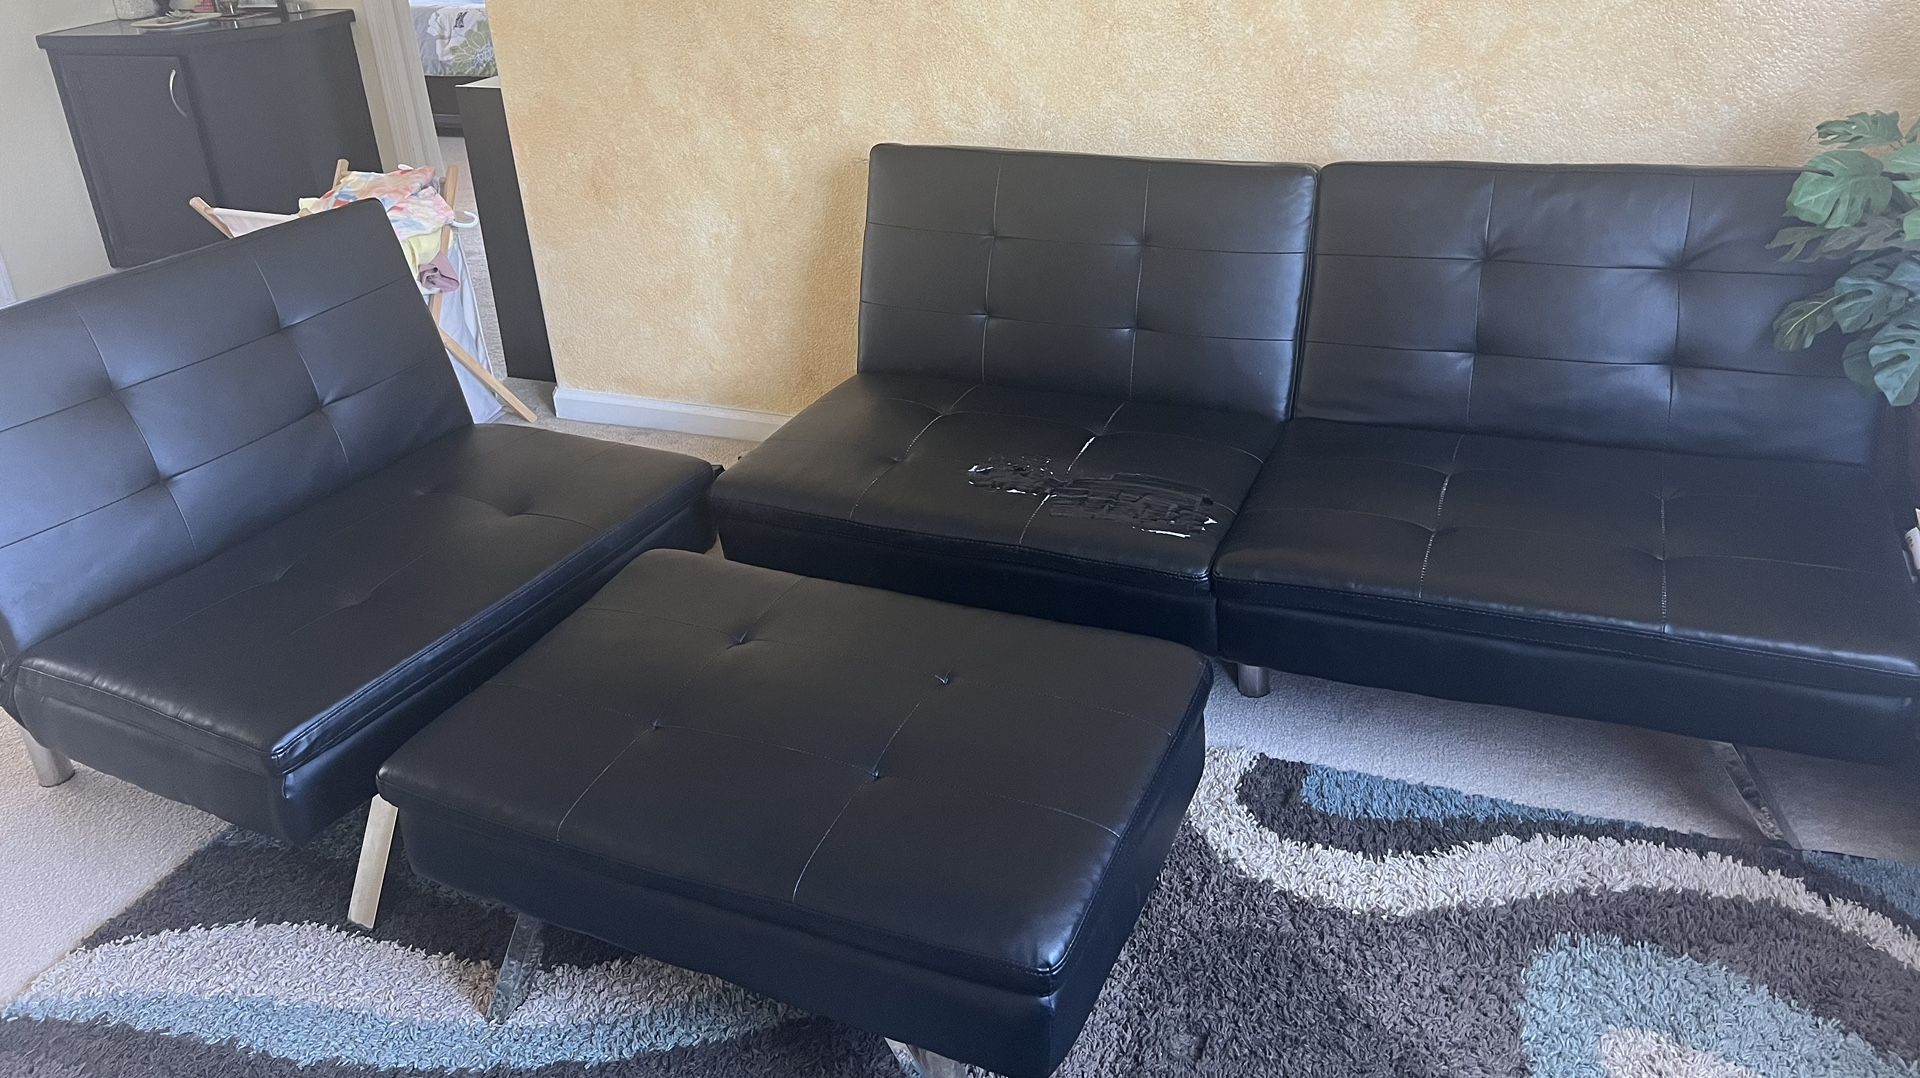 FREE 3 Piece Couch Set, Coverts Into Bed.